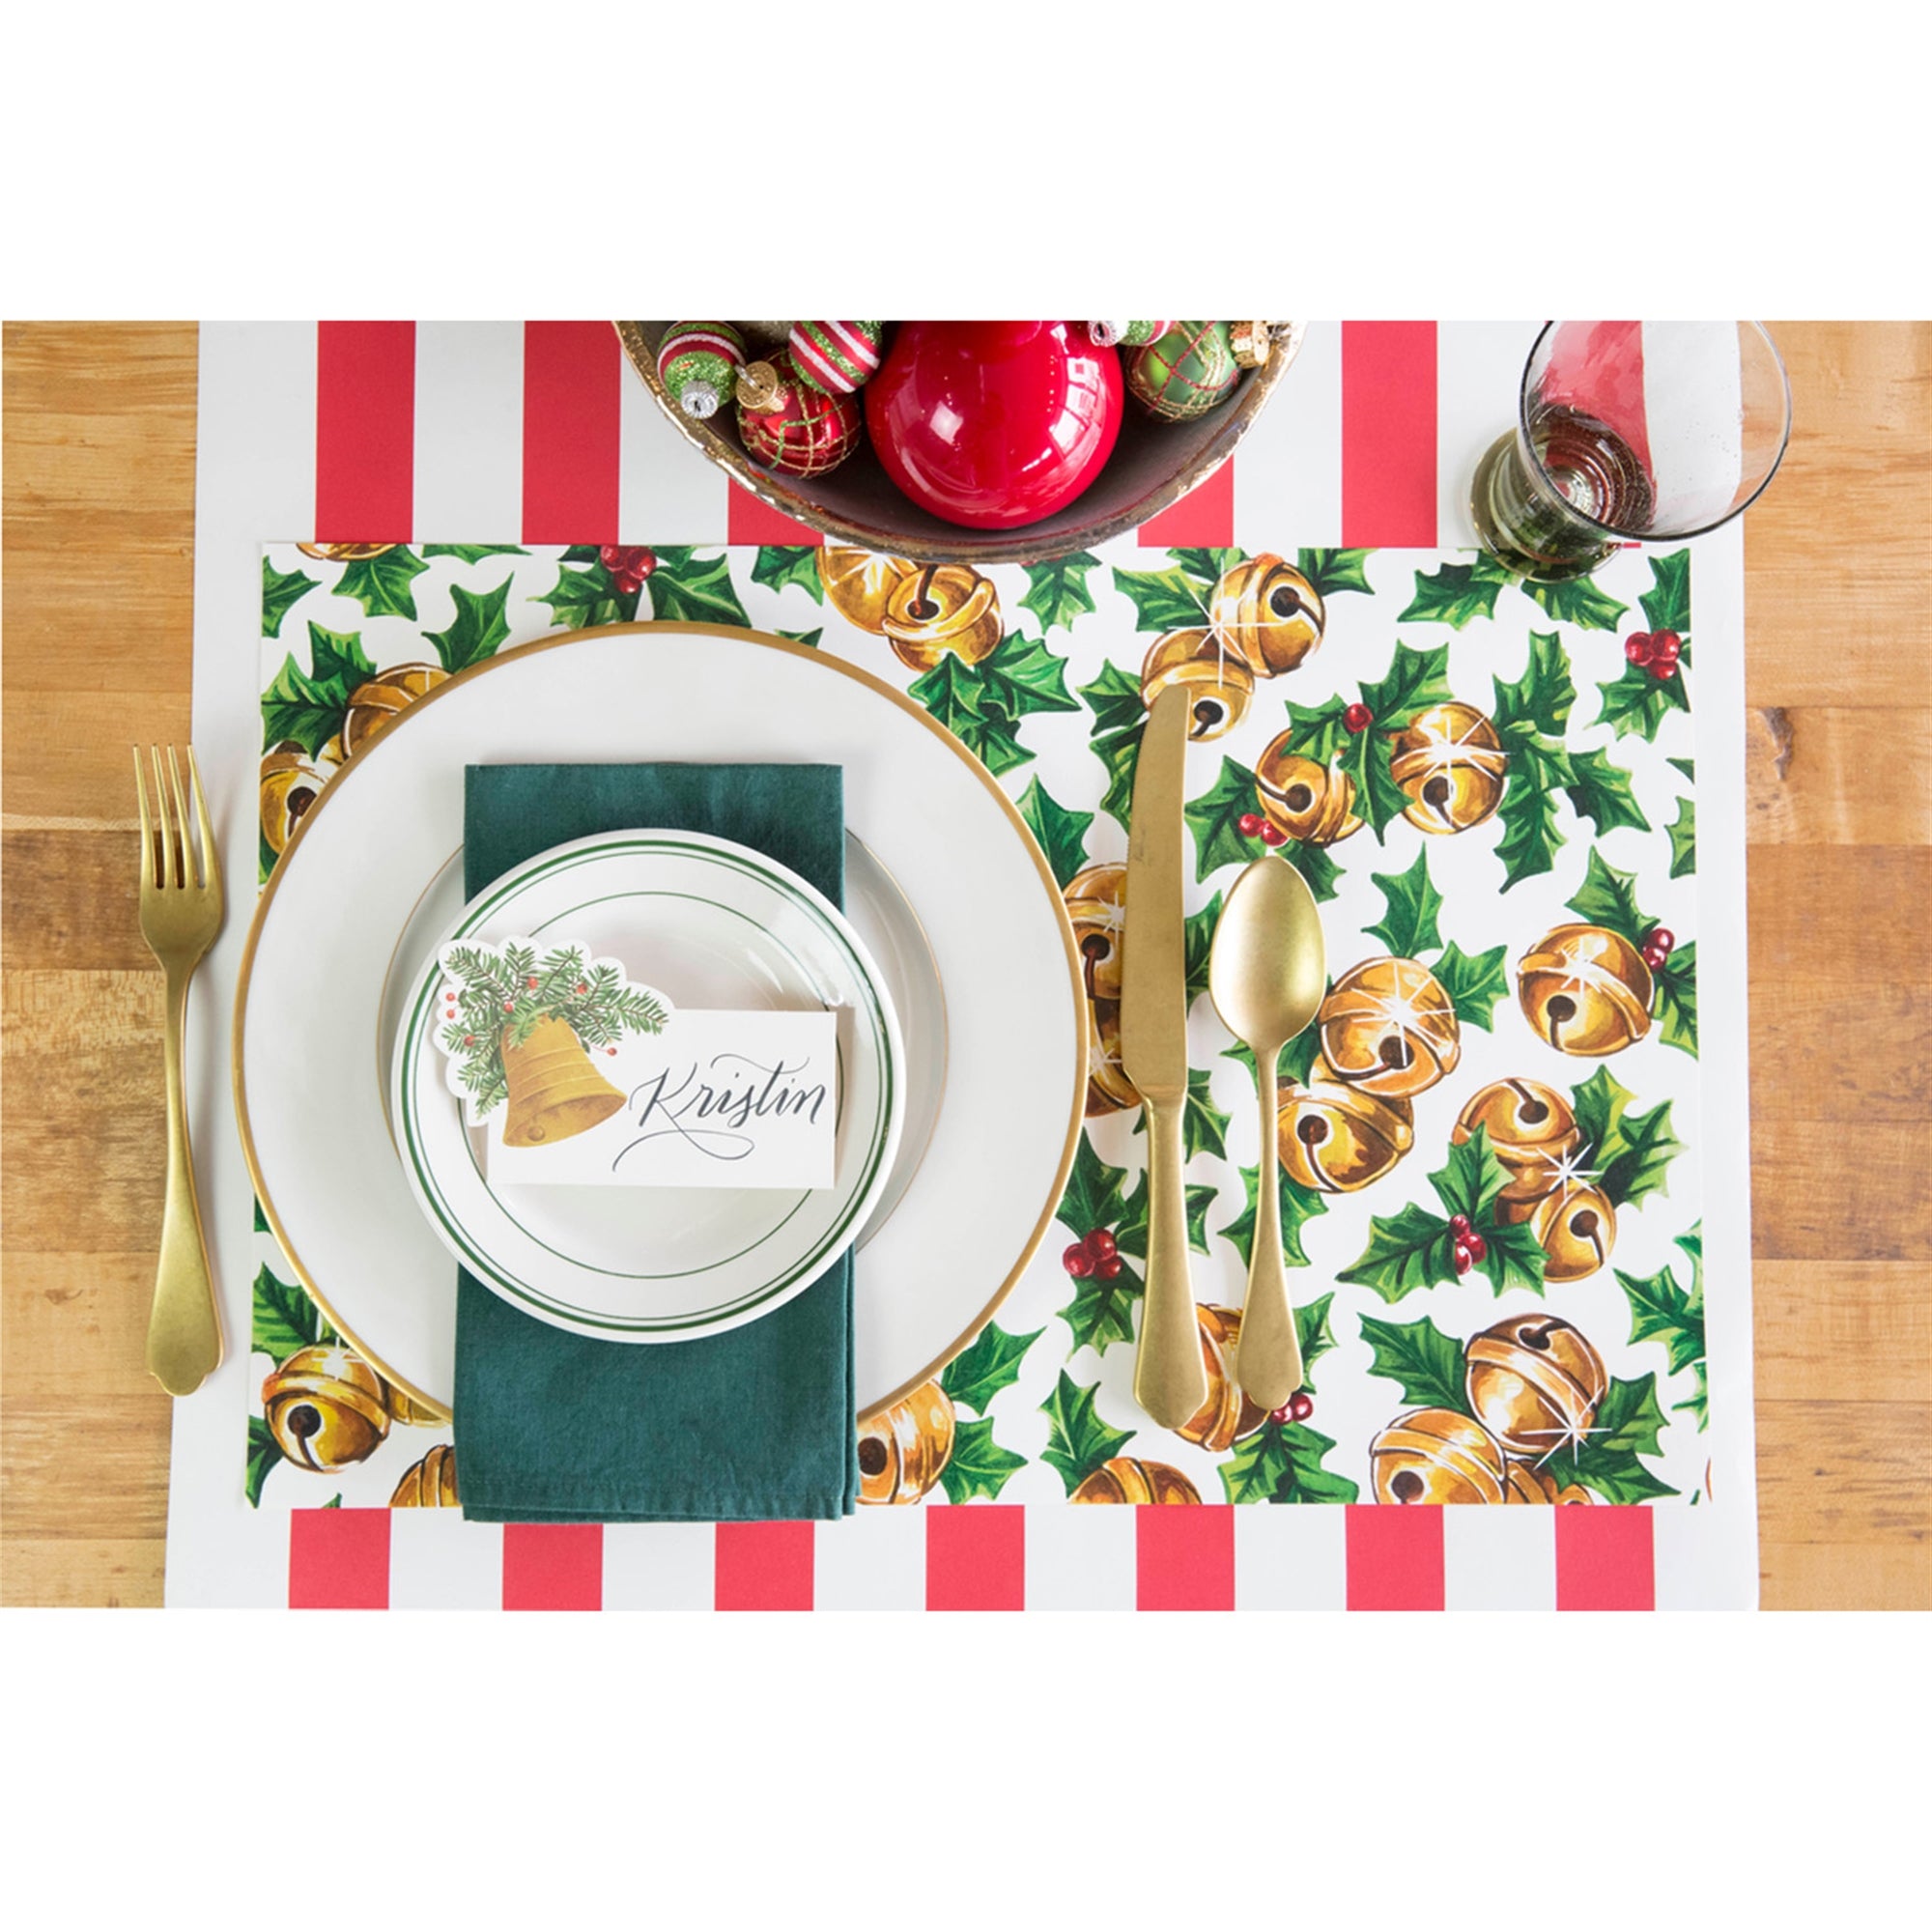 Jingle All the Way Placemat